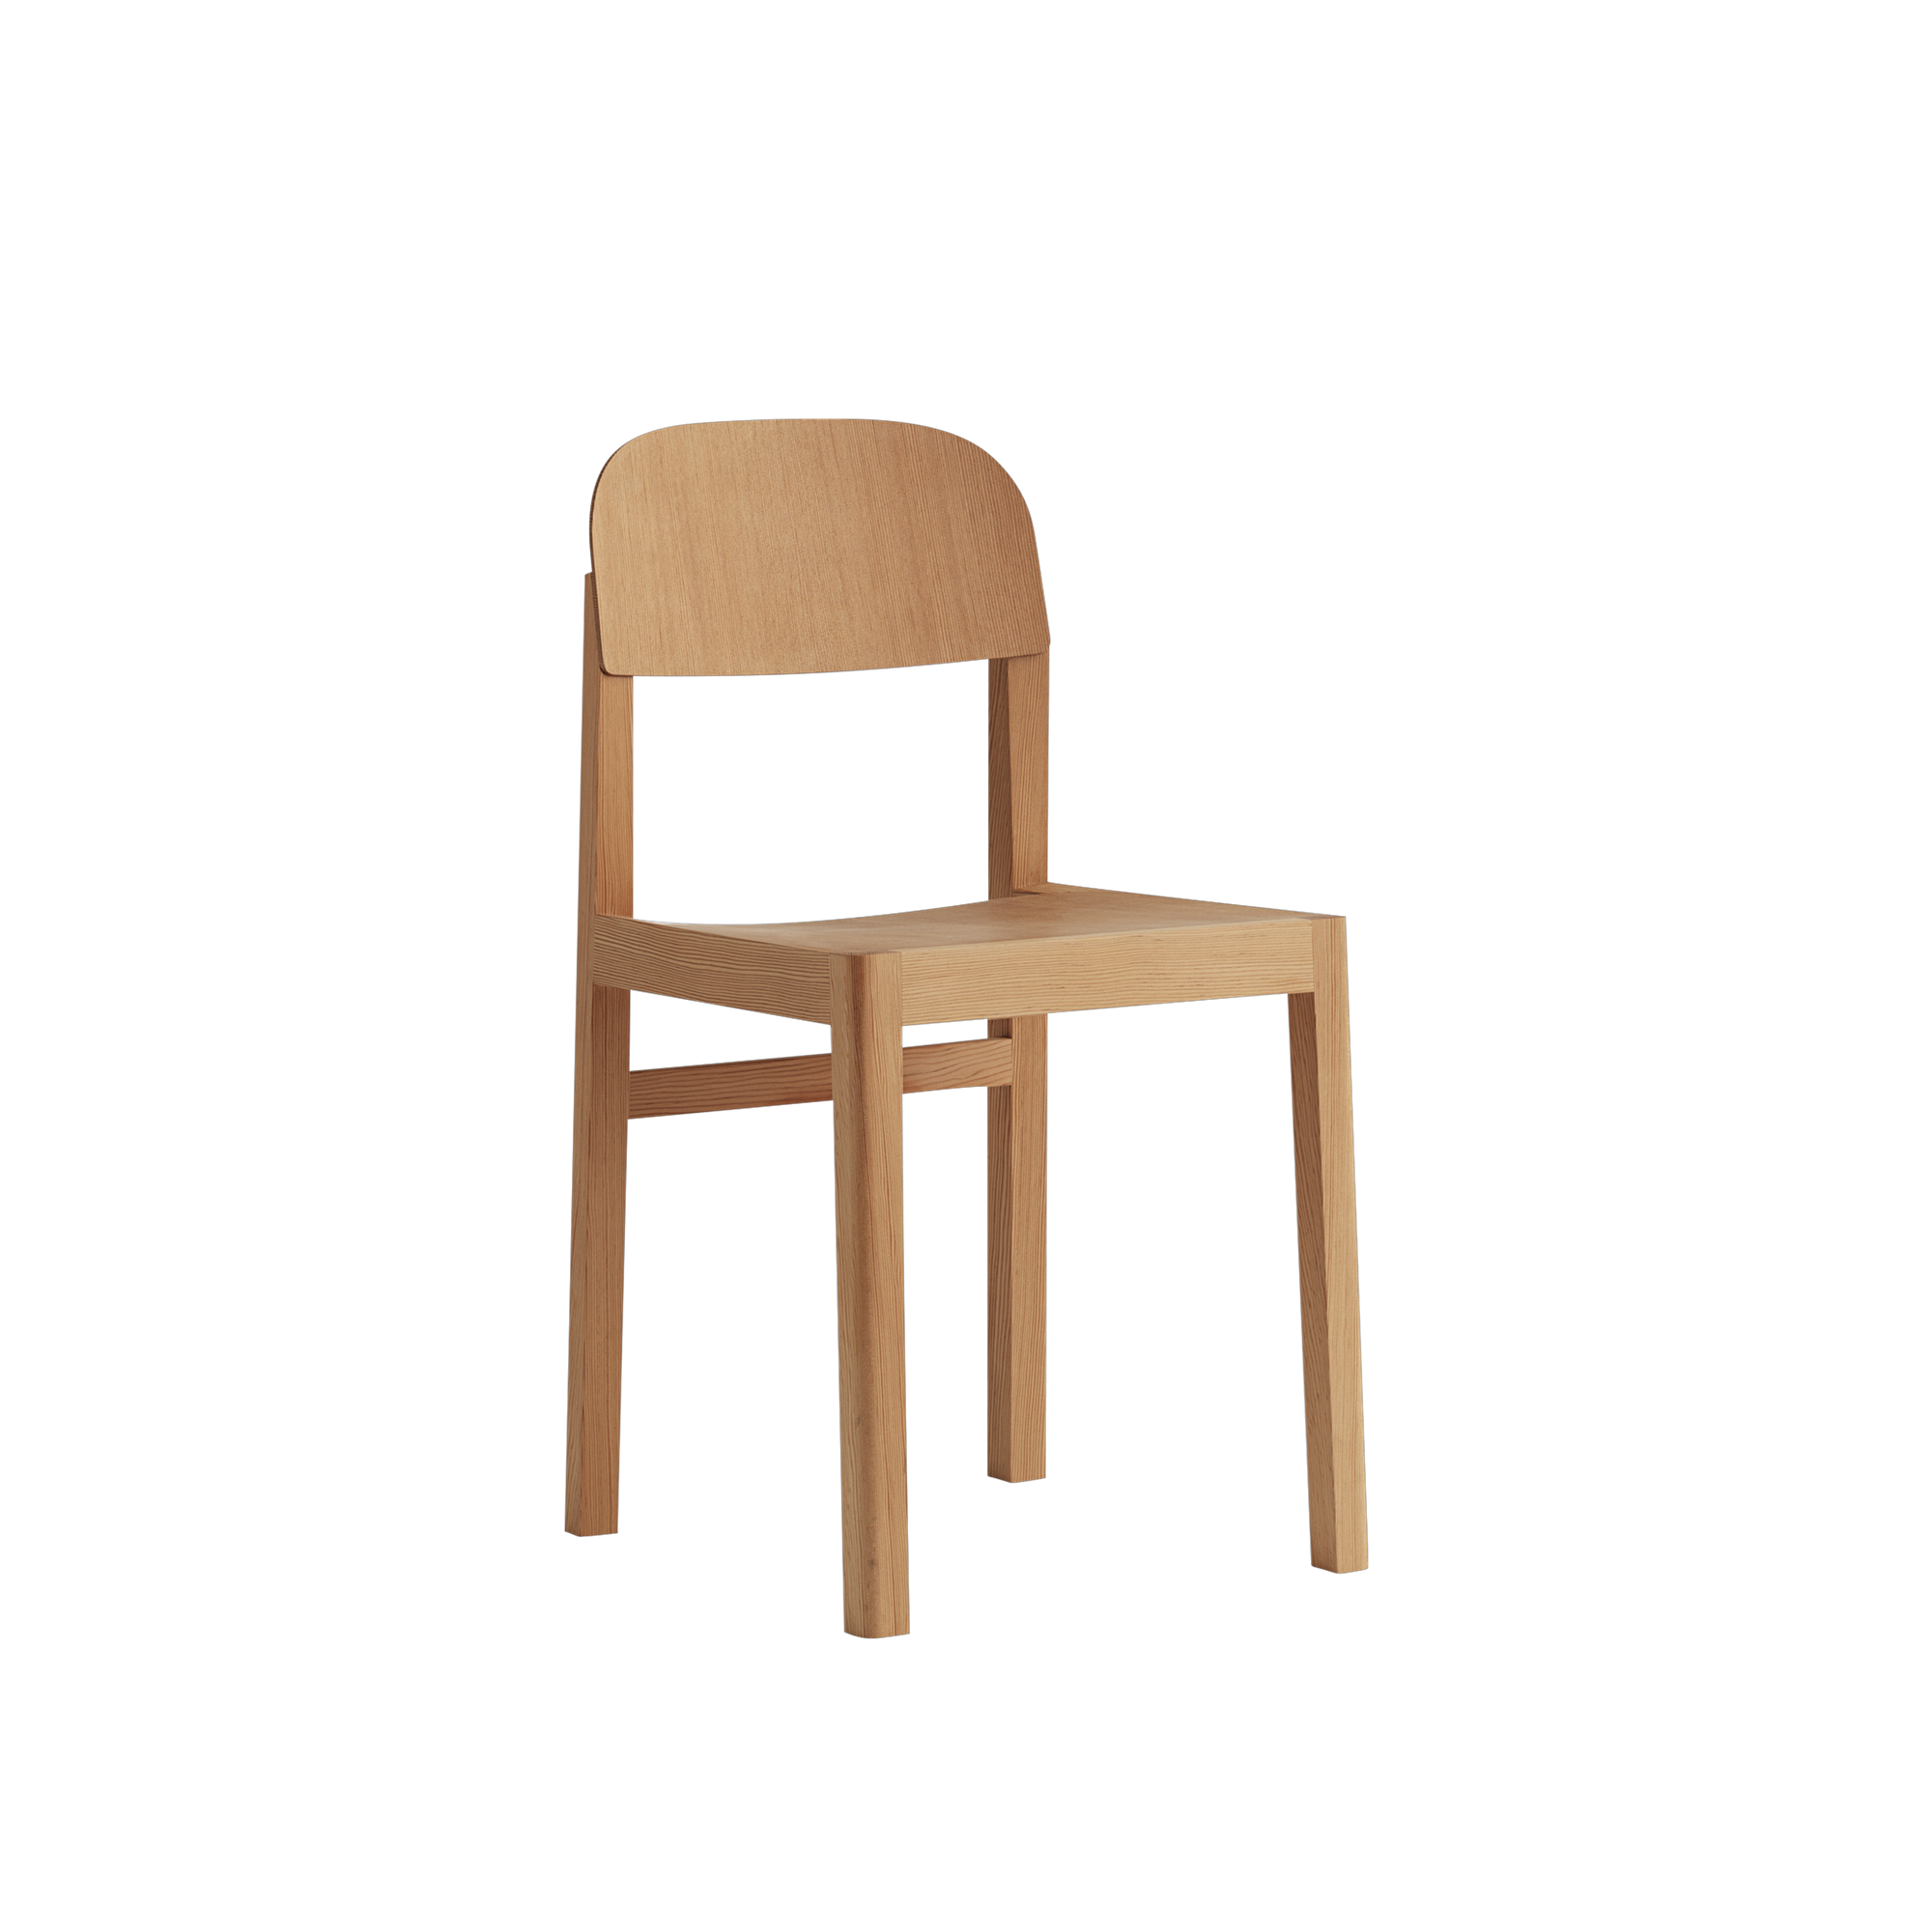 Workshop Chair PNG Image